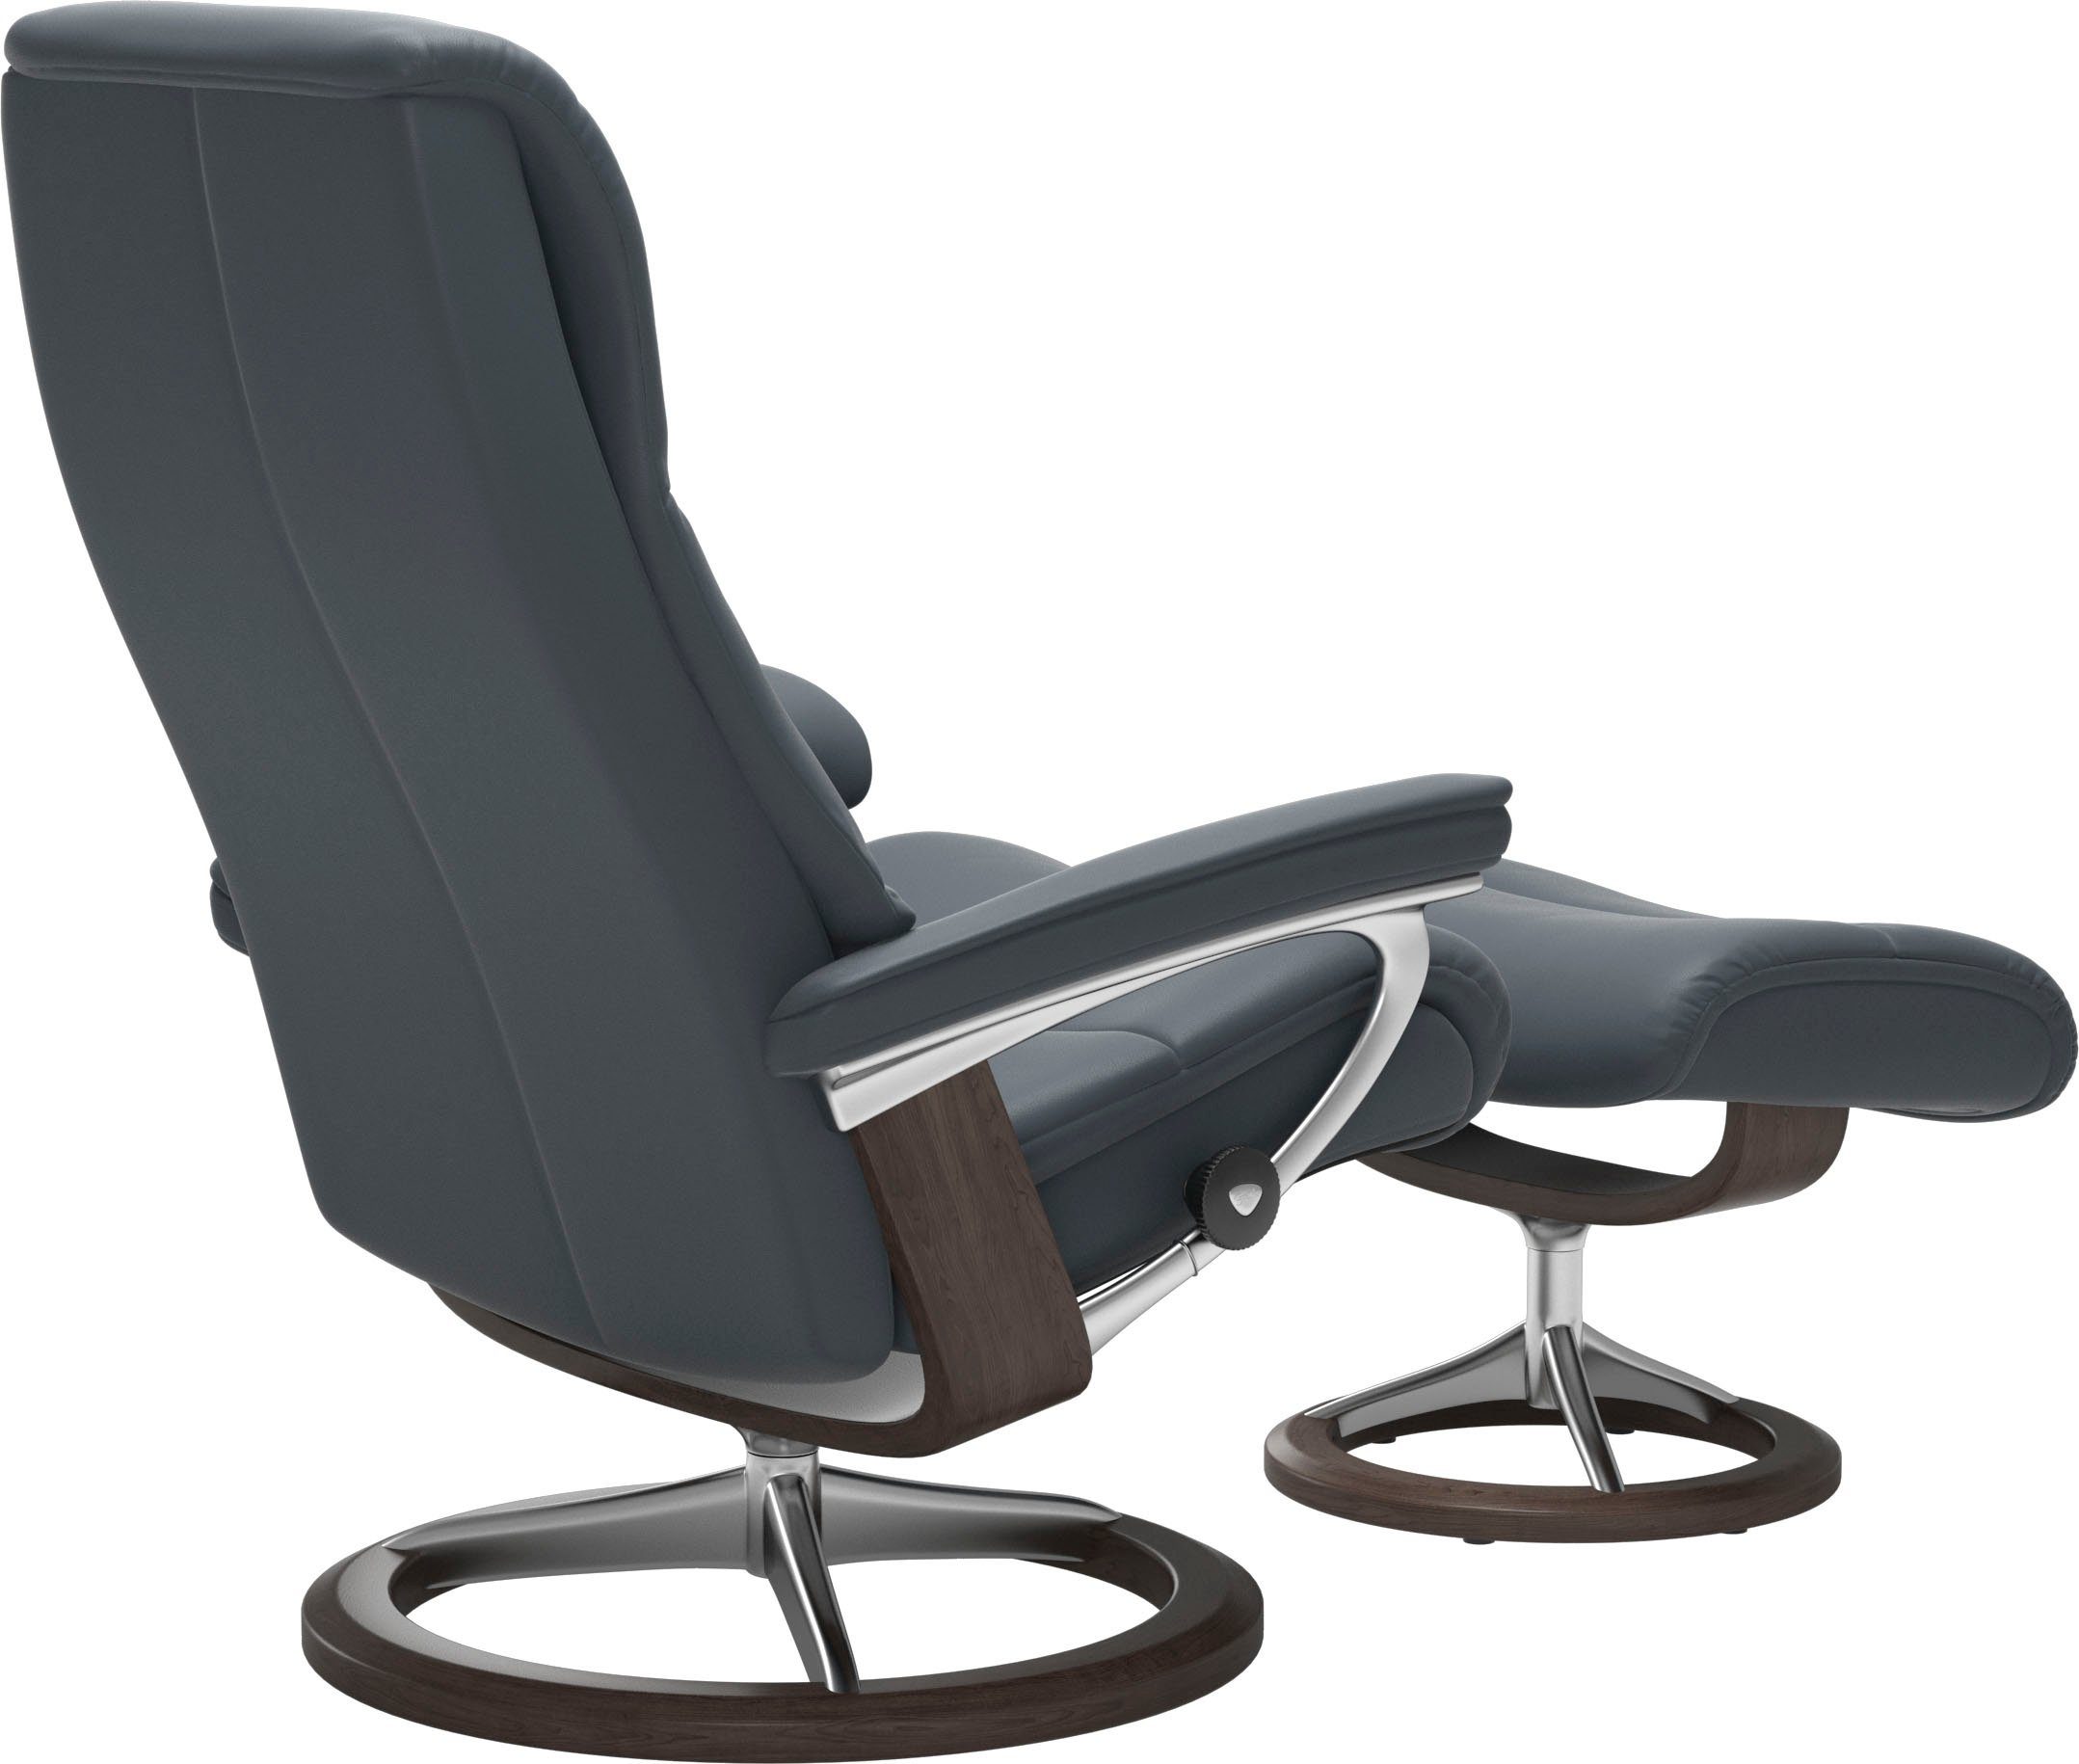 Wenge View, Stressless® Relaxsessel Größe Base, Signature L,Gestell mit